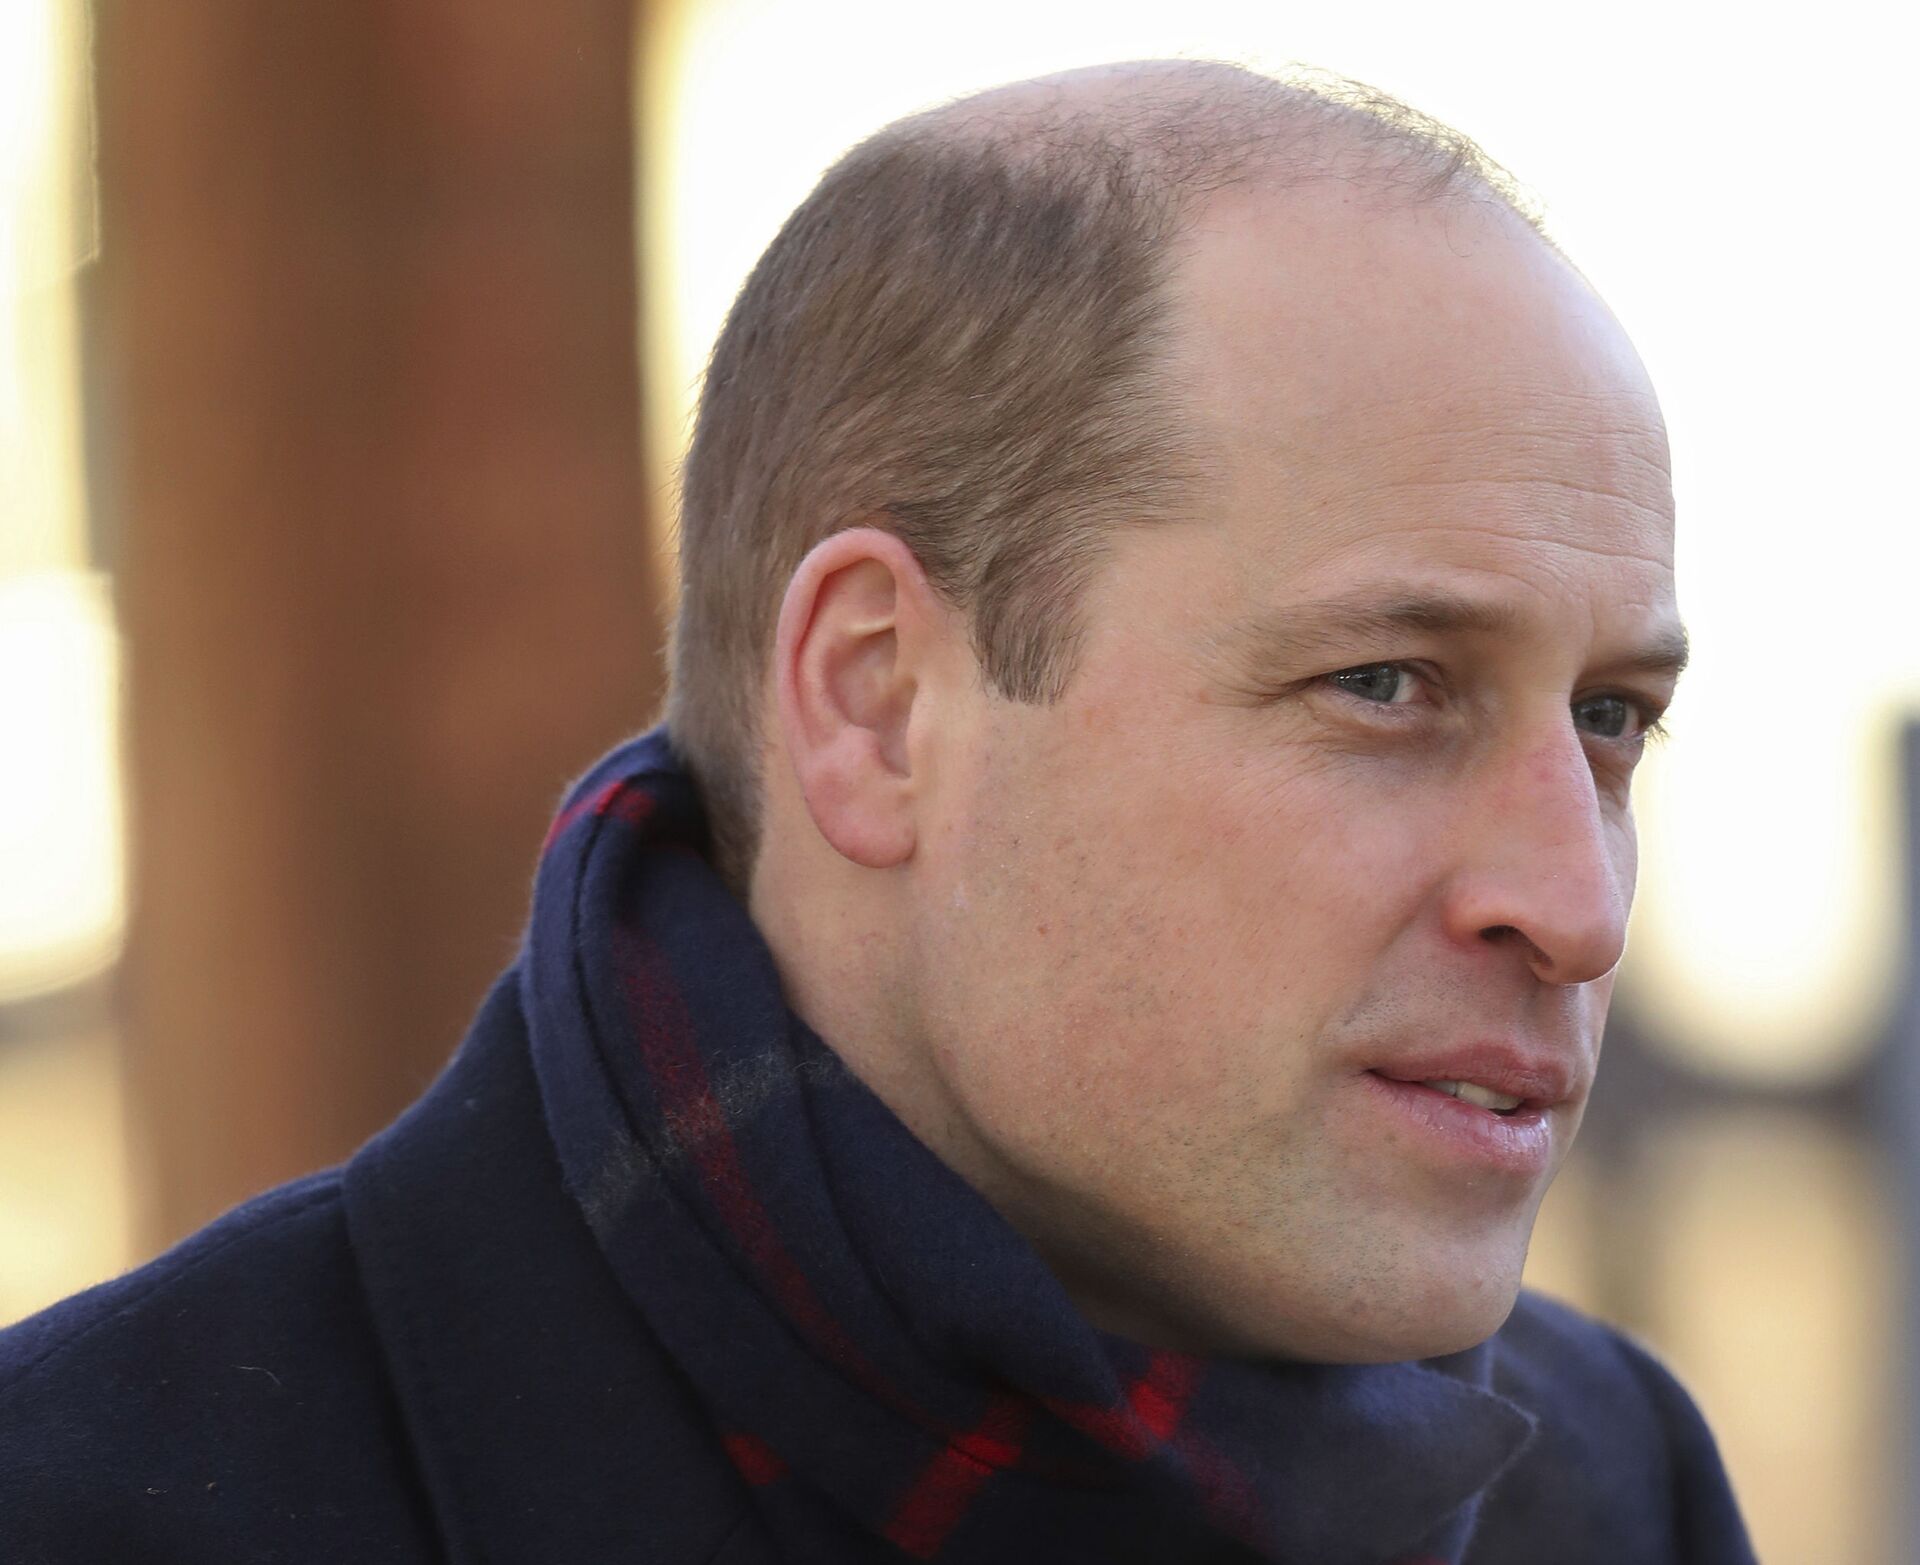 Britain's Prince William talks to members of the public at Cardiff Castle on Tuesday Dec. 8, 2020, in Cardiff, Wales - Sputnik International, 1920, 20.02.2022